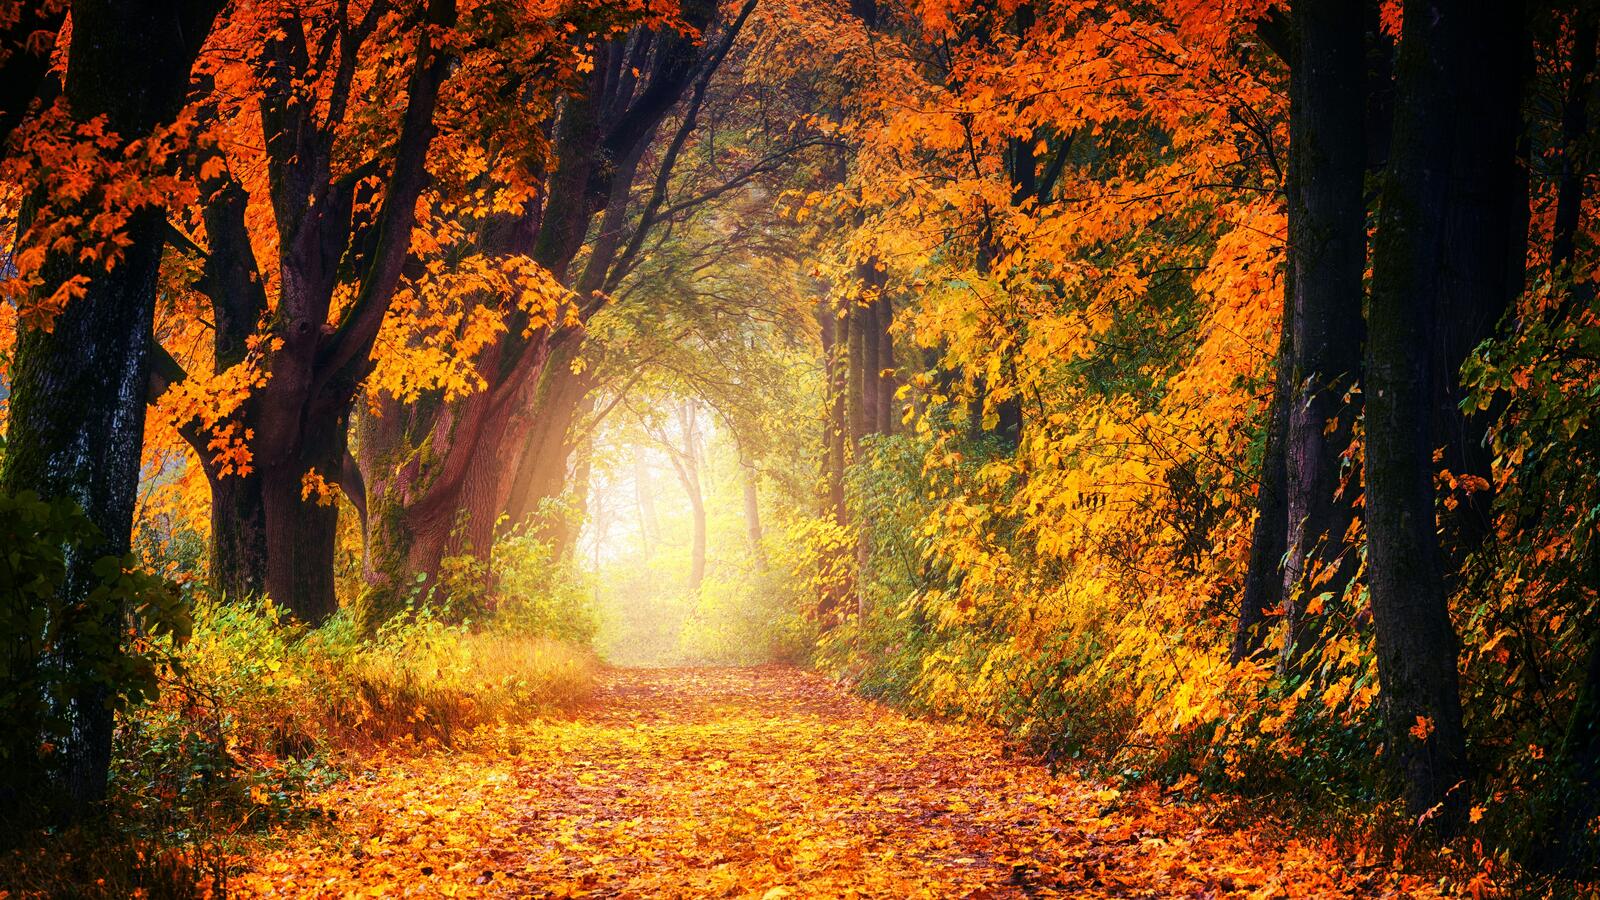 Free photo A forest road with fallen golden leaves